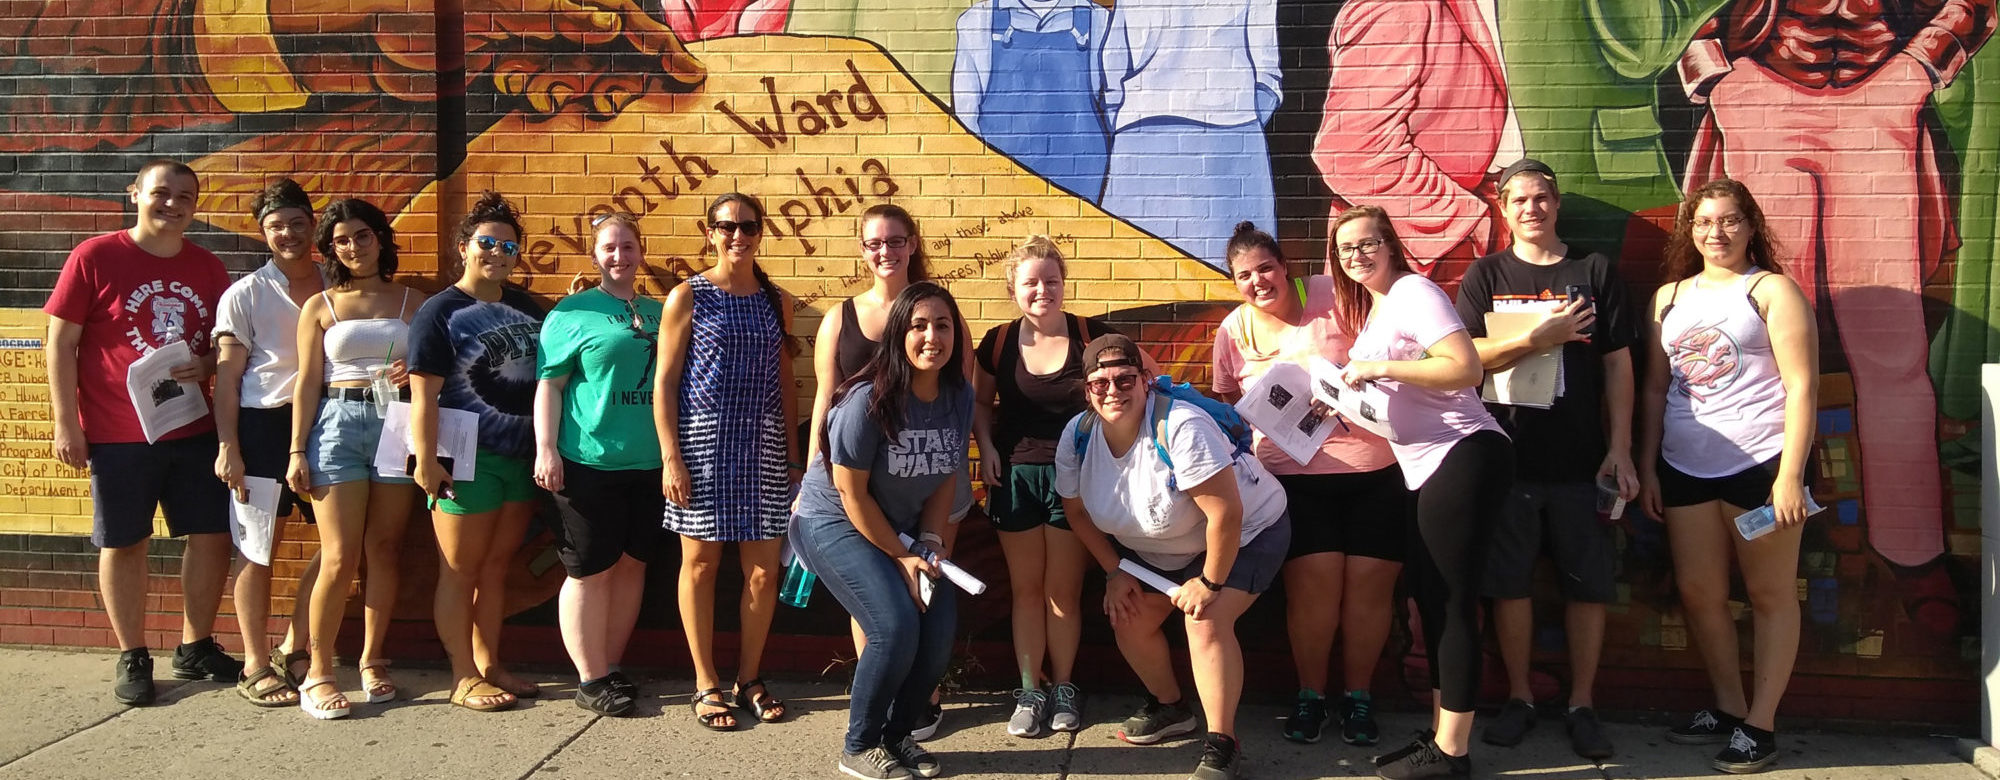 Students in front of mural